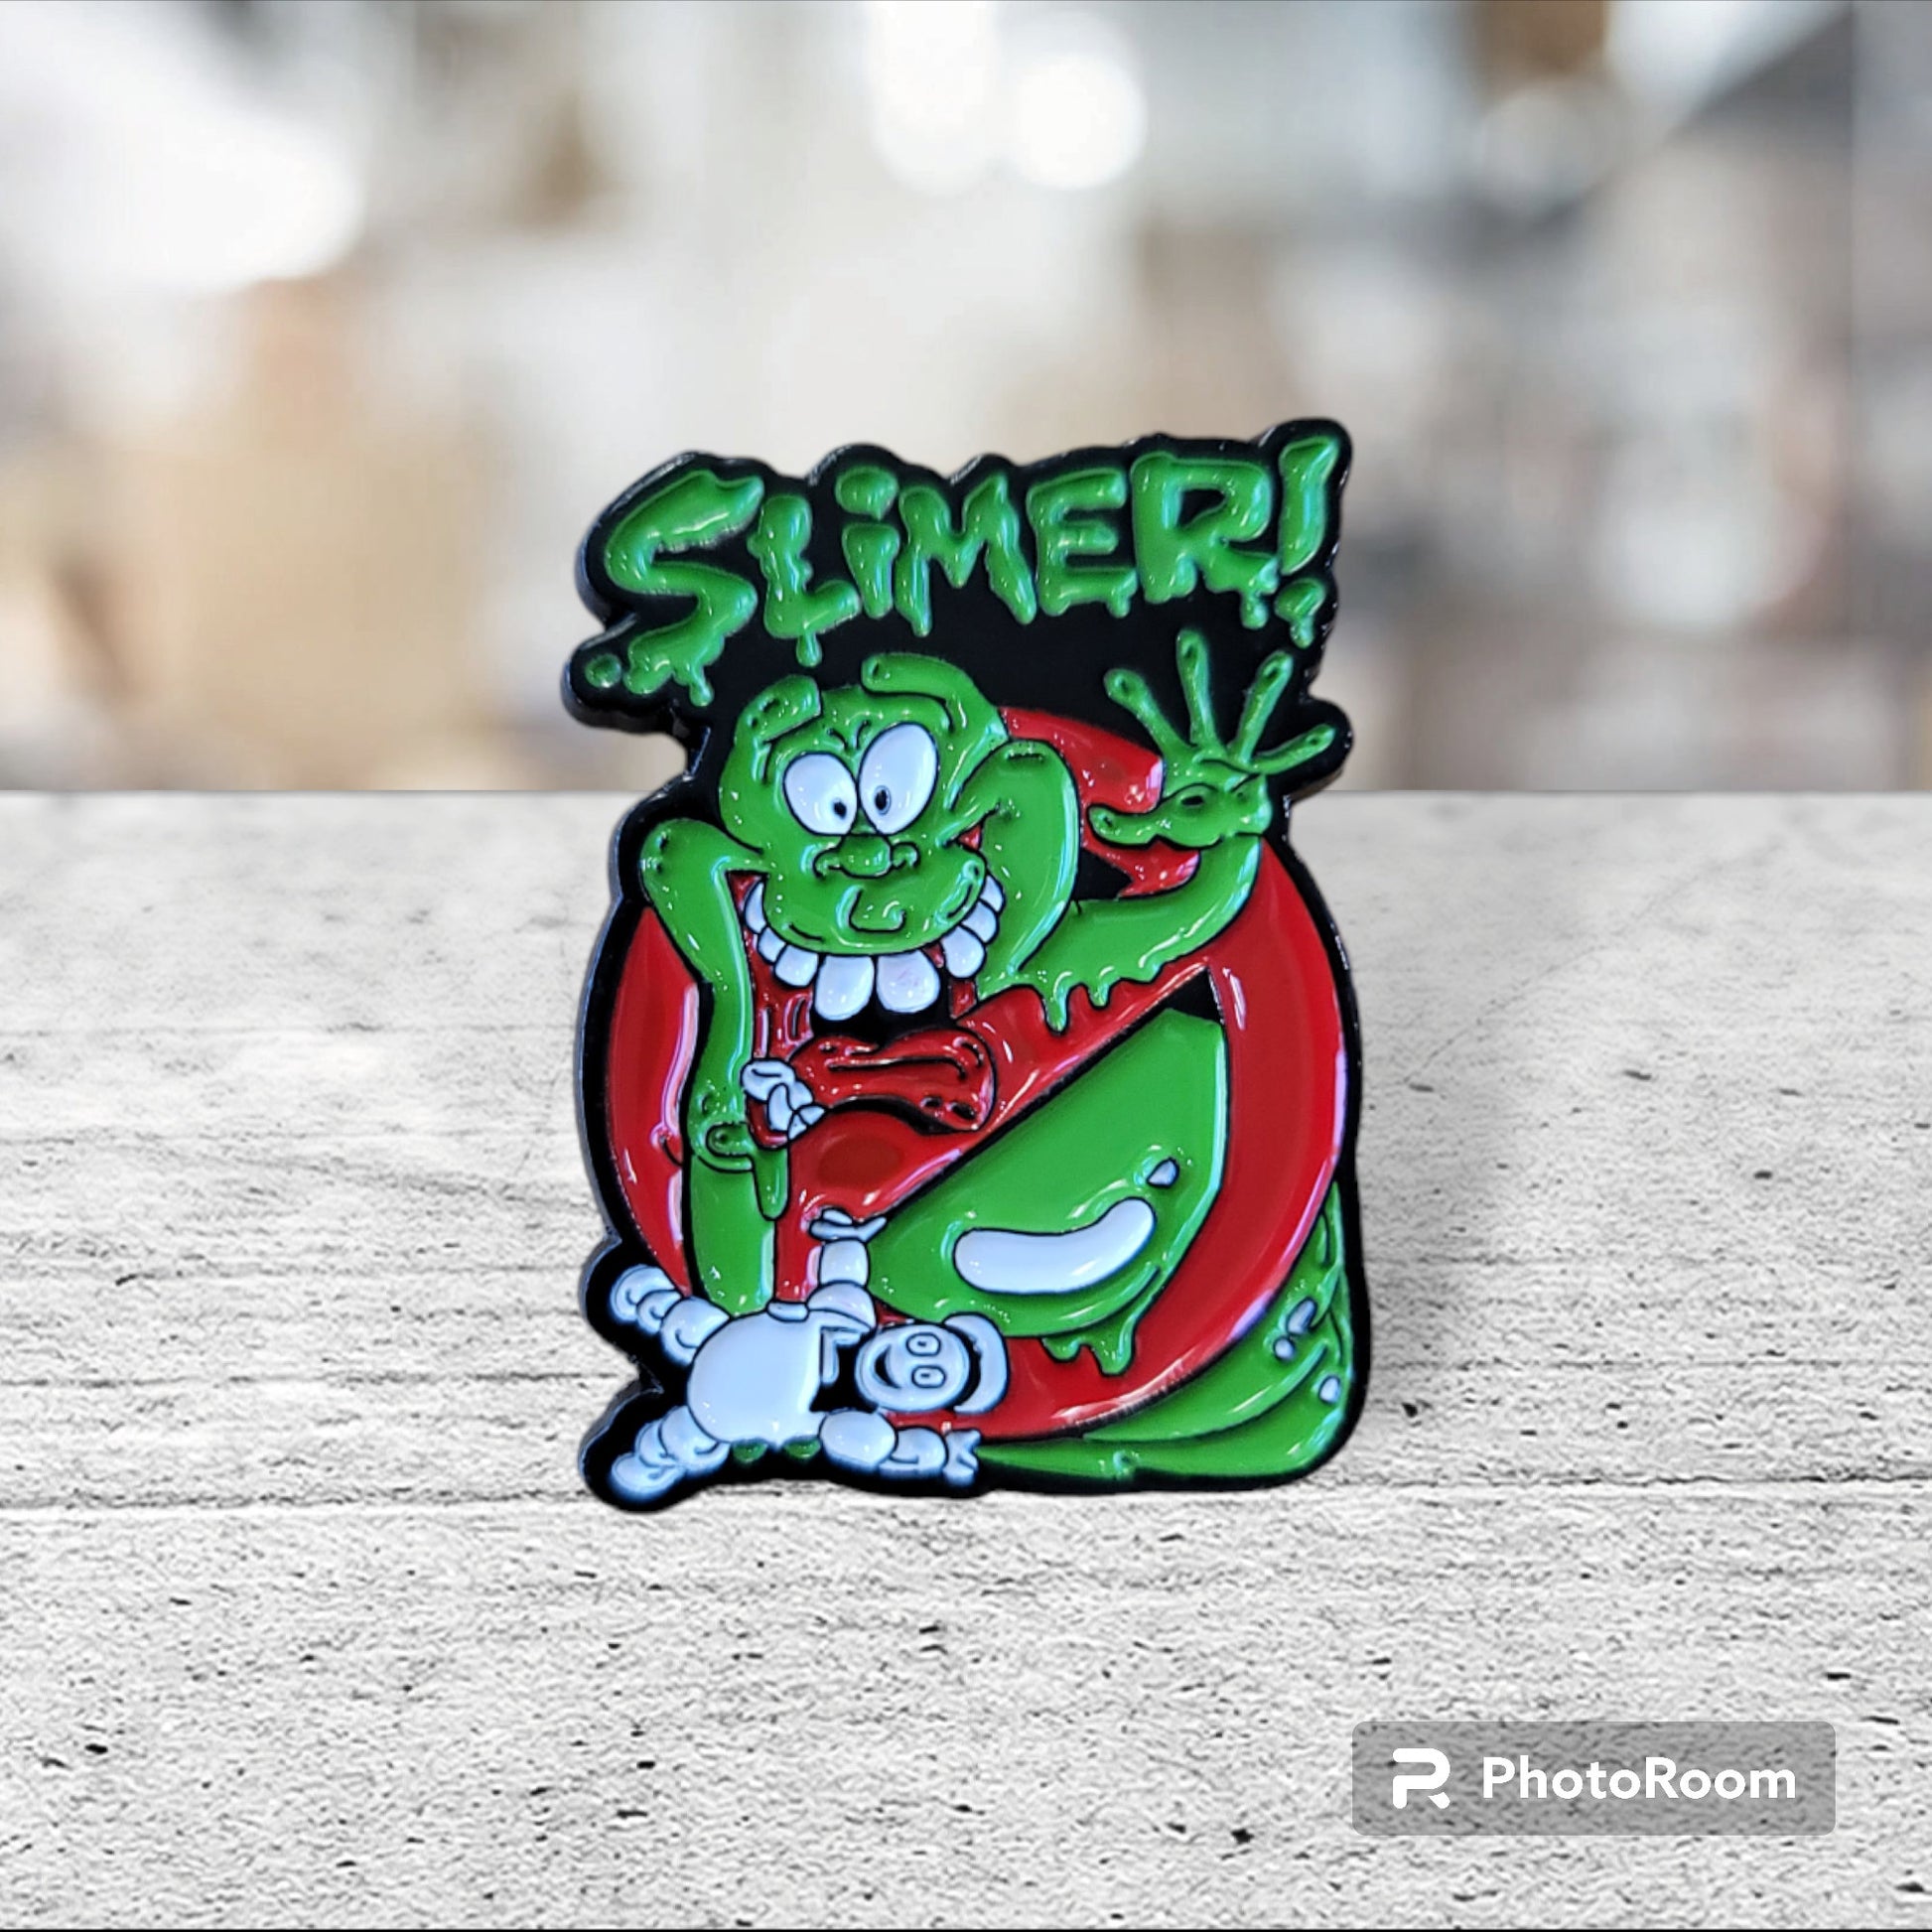 Ghostbusters Inspired Pin, Slimer Inspired Pin